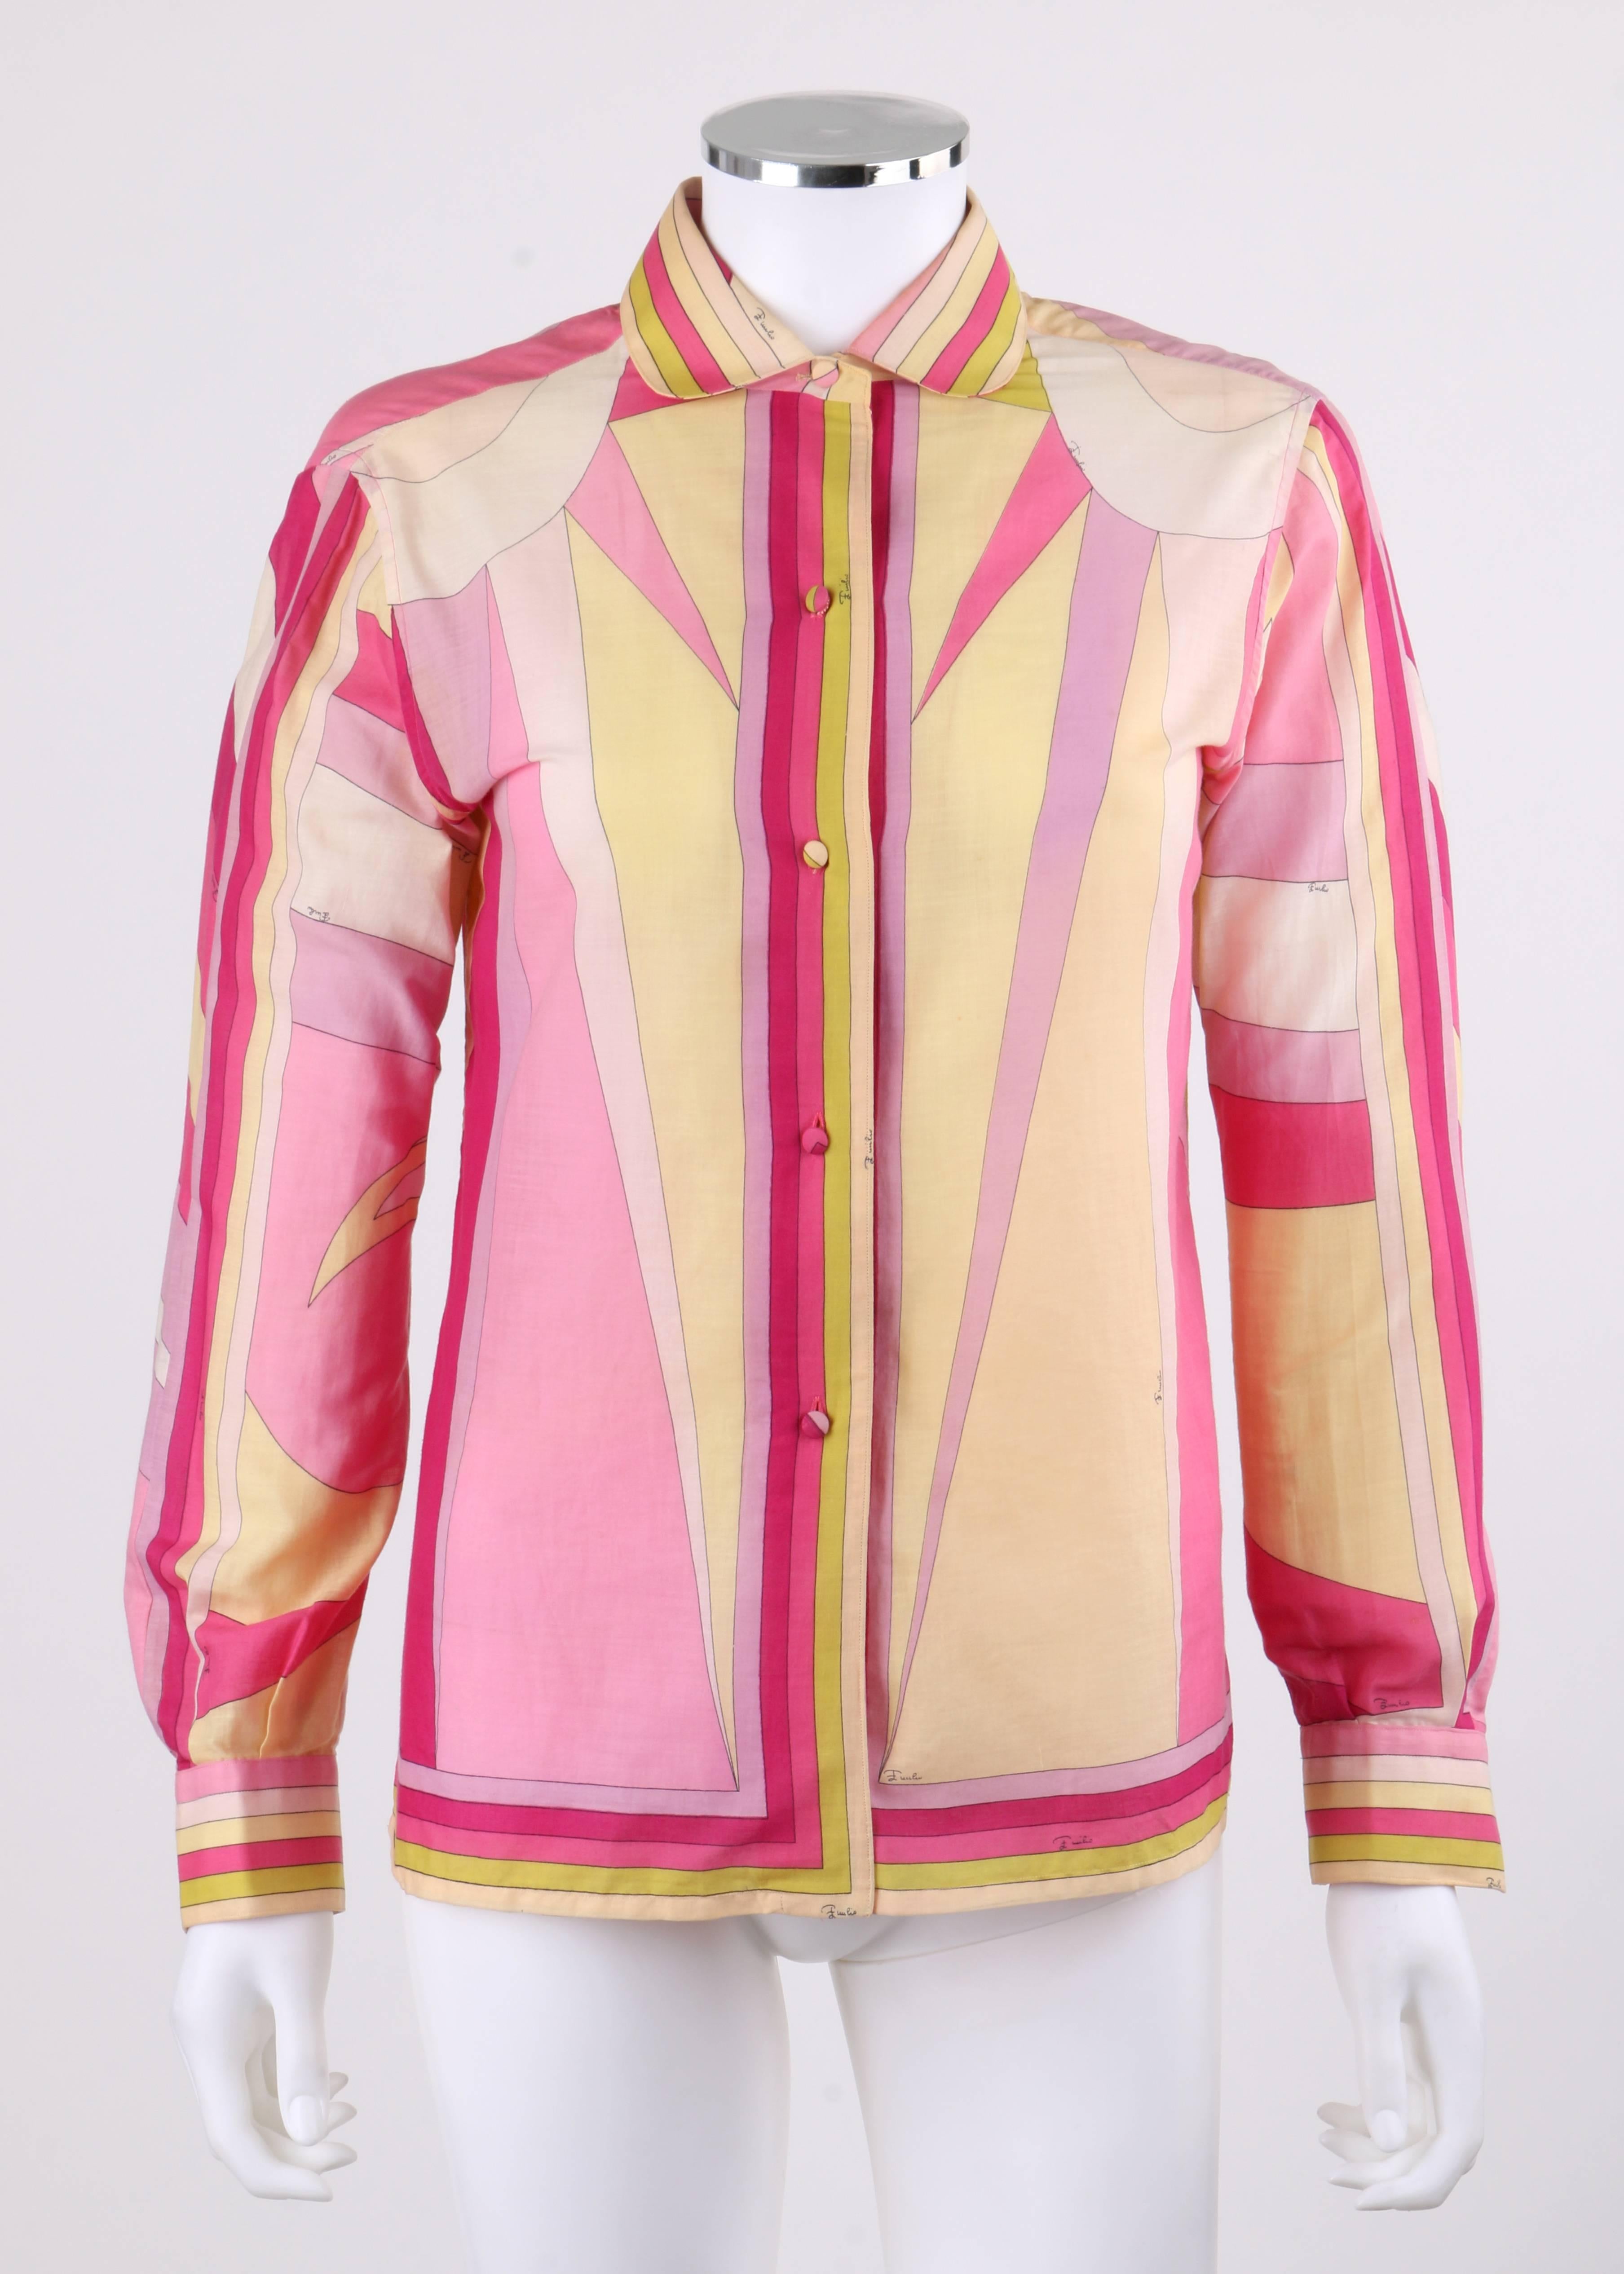 Vintage Emilio Pucci exclusively for Saks Fifth Avenue c.1960's geometric sun burst signature print button up shirt. Multi-color sun burst geometric cotton print in shades of pink, yellow, and white. Rounded shirt collar. Five center front covered